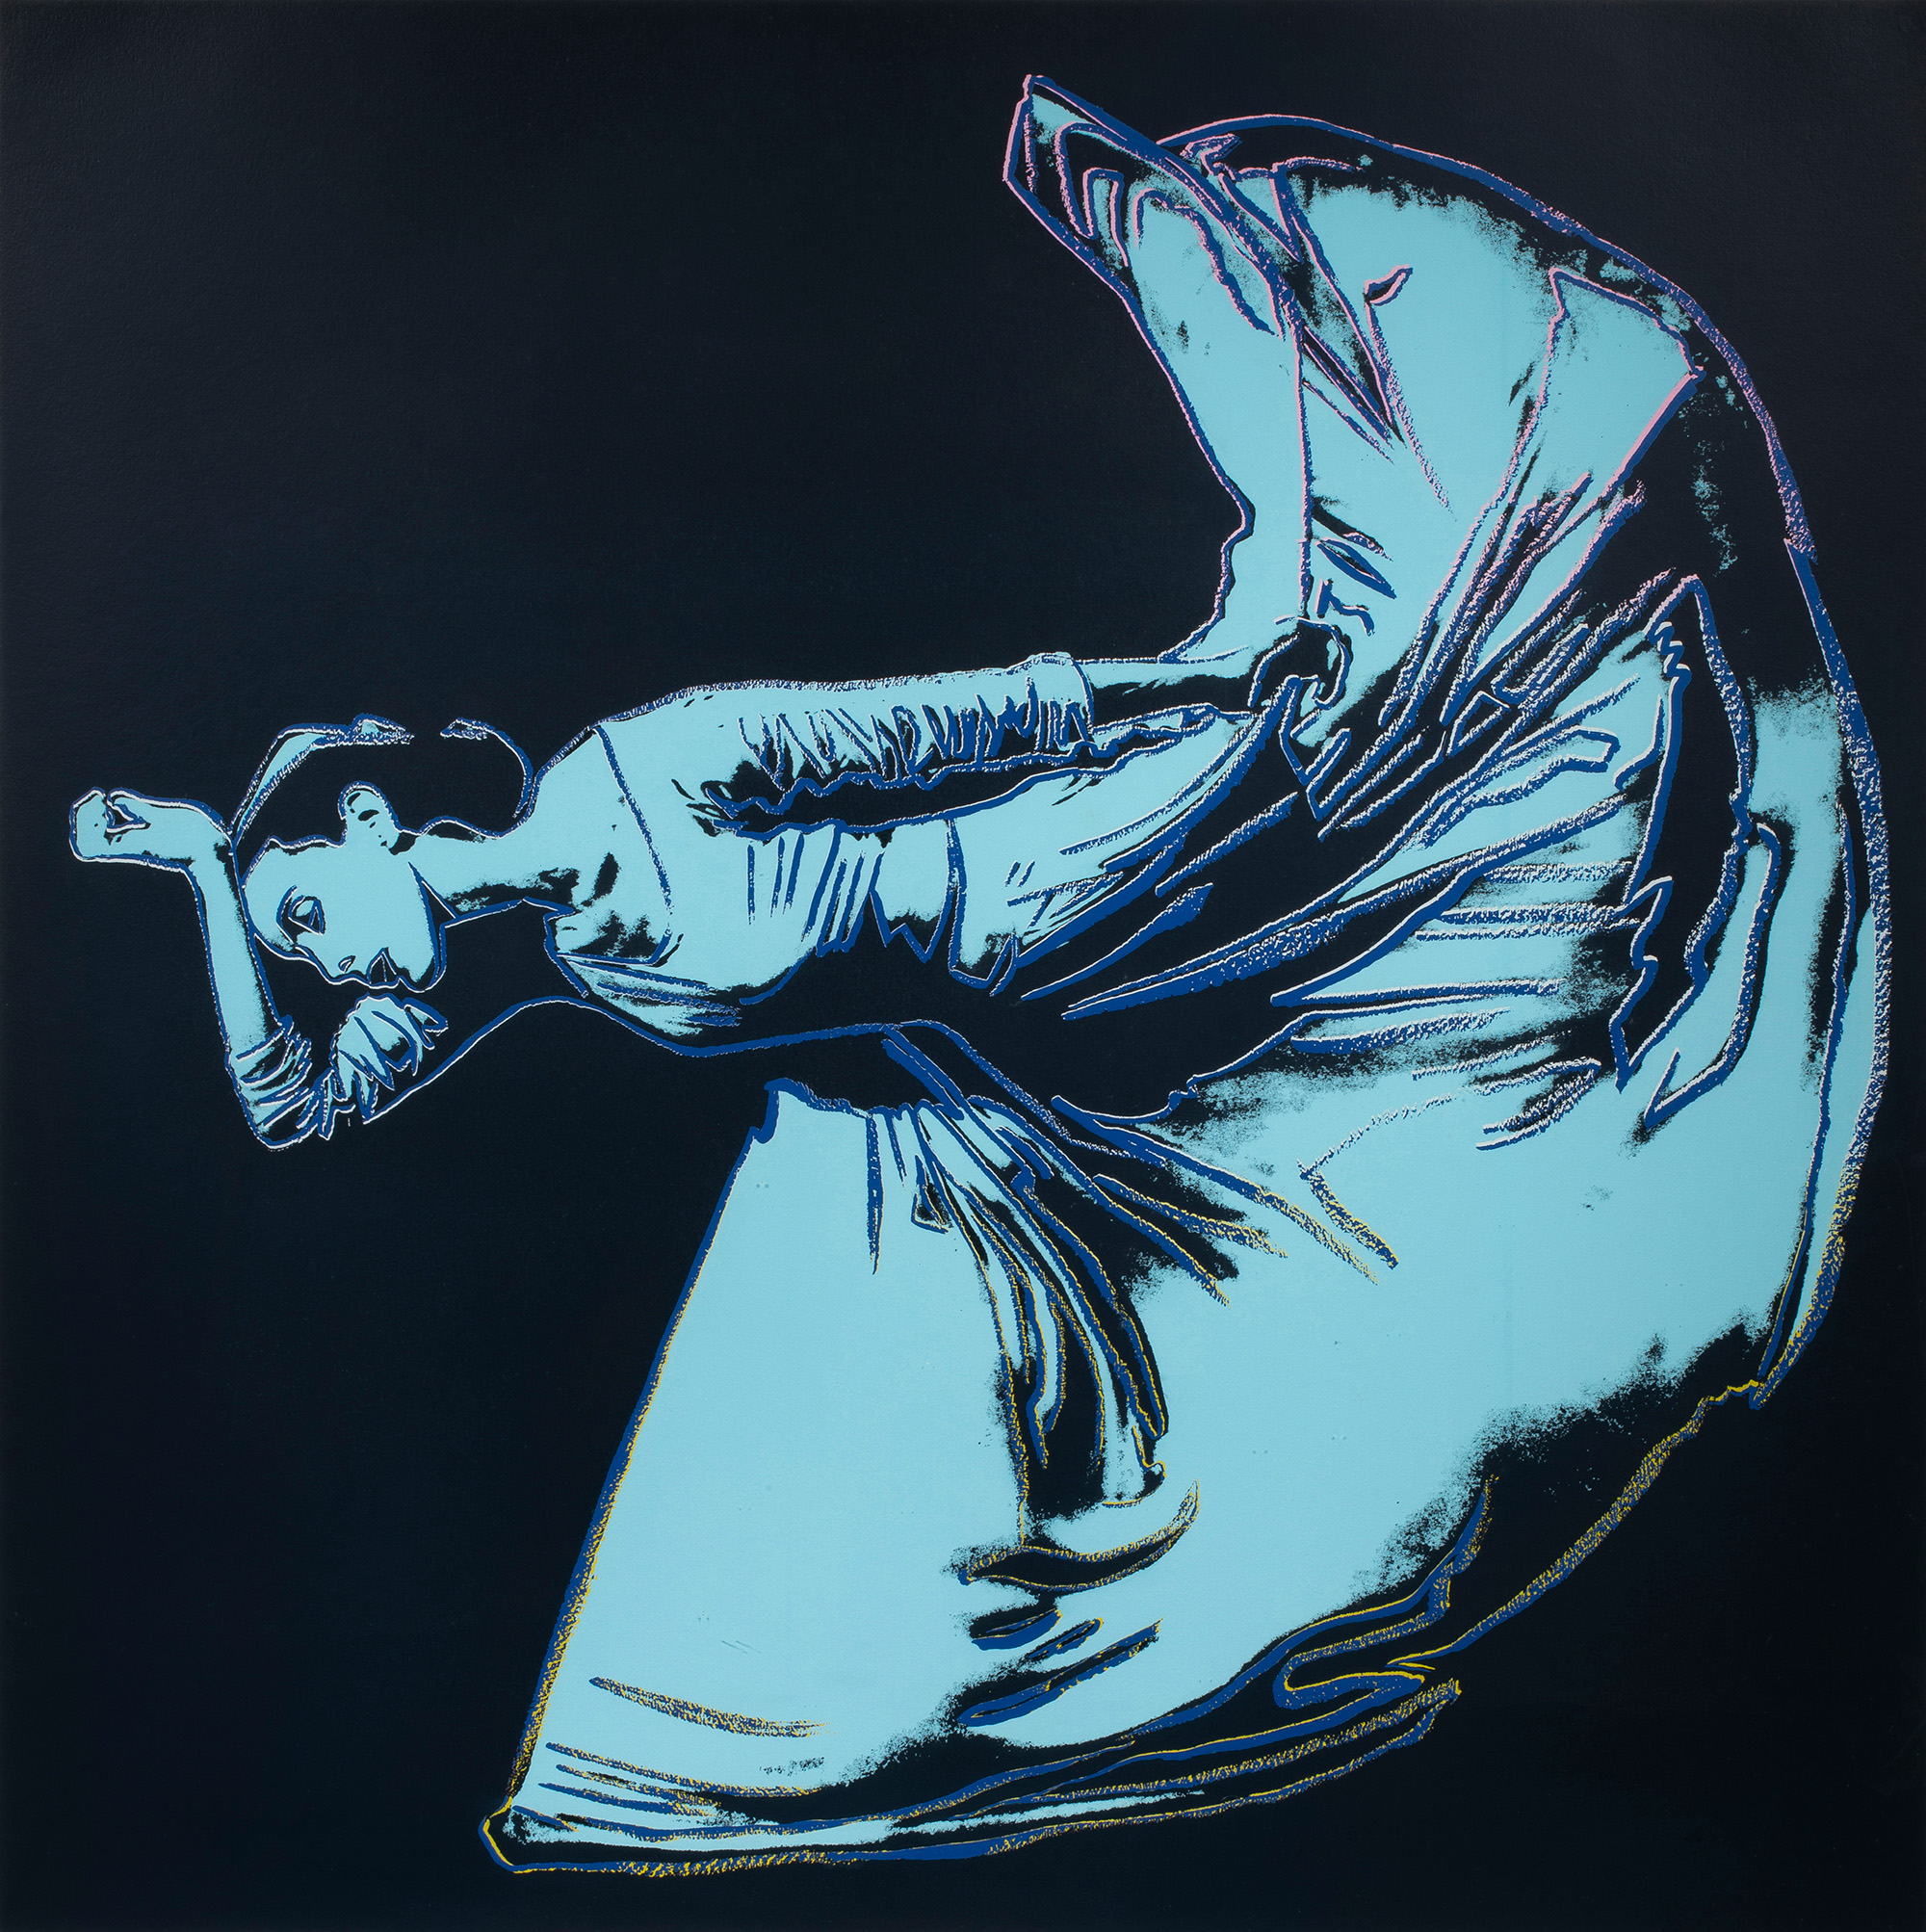 Andy Warhol (American, 1928–1987), Letter to the World (The Kick), from Martha Graham, 1986, screenprint, 36″ x 36″.